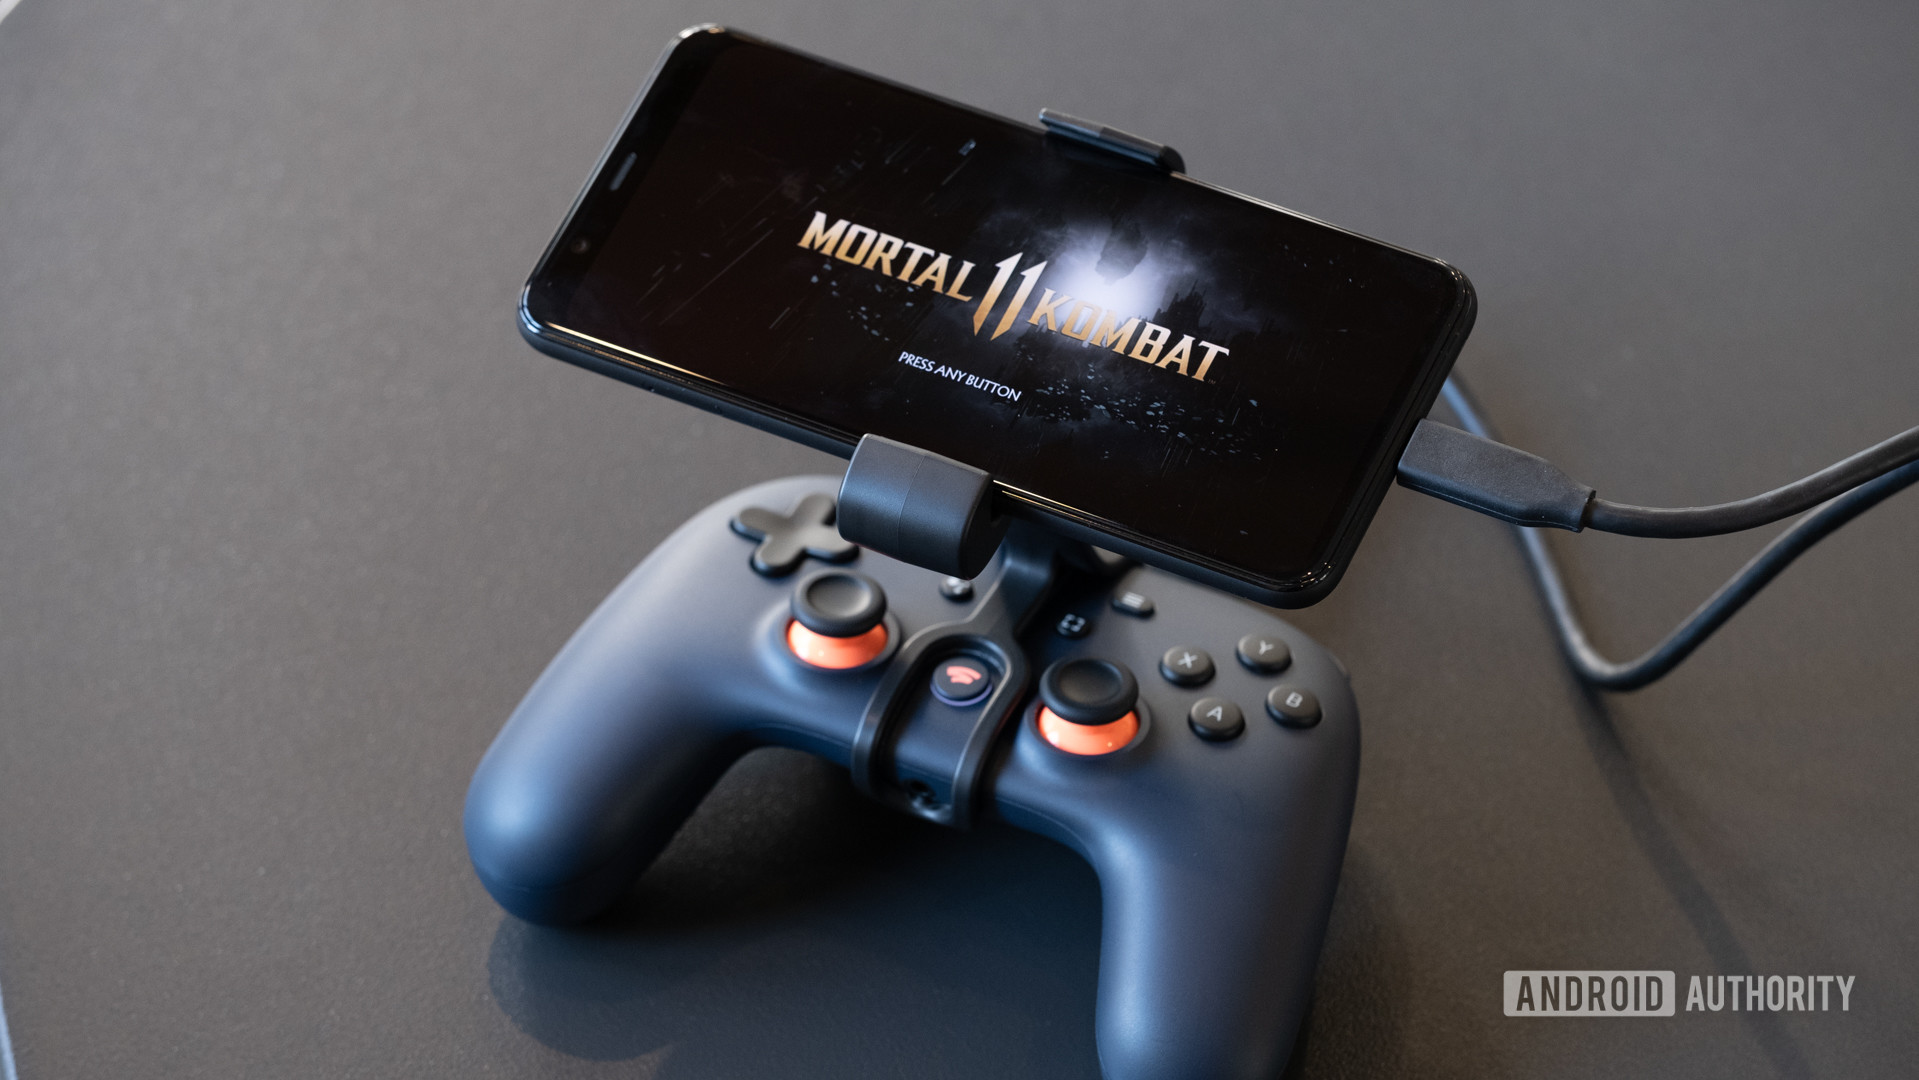 https://www.androidauthority.com/wp-content/uploads/2019/11/Google-Stadia-controller-with-phone-mounted.jpg